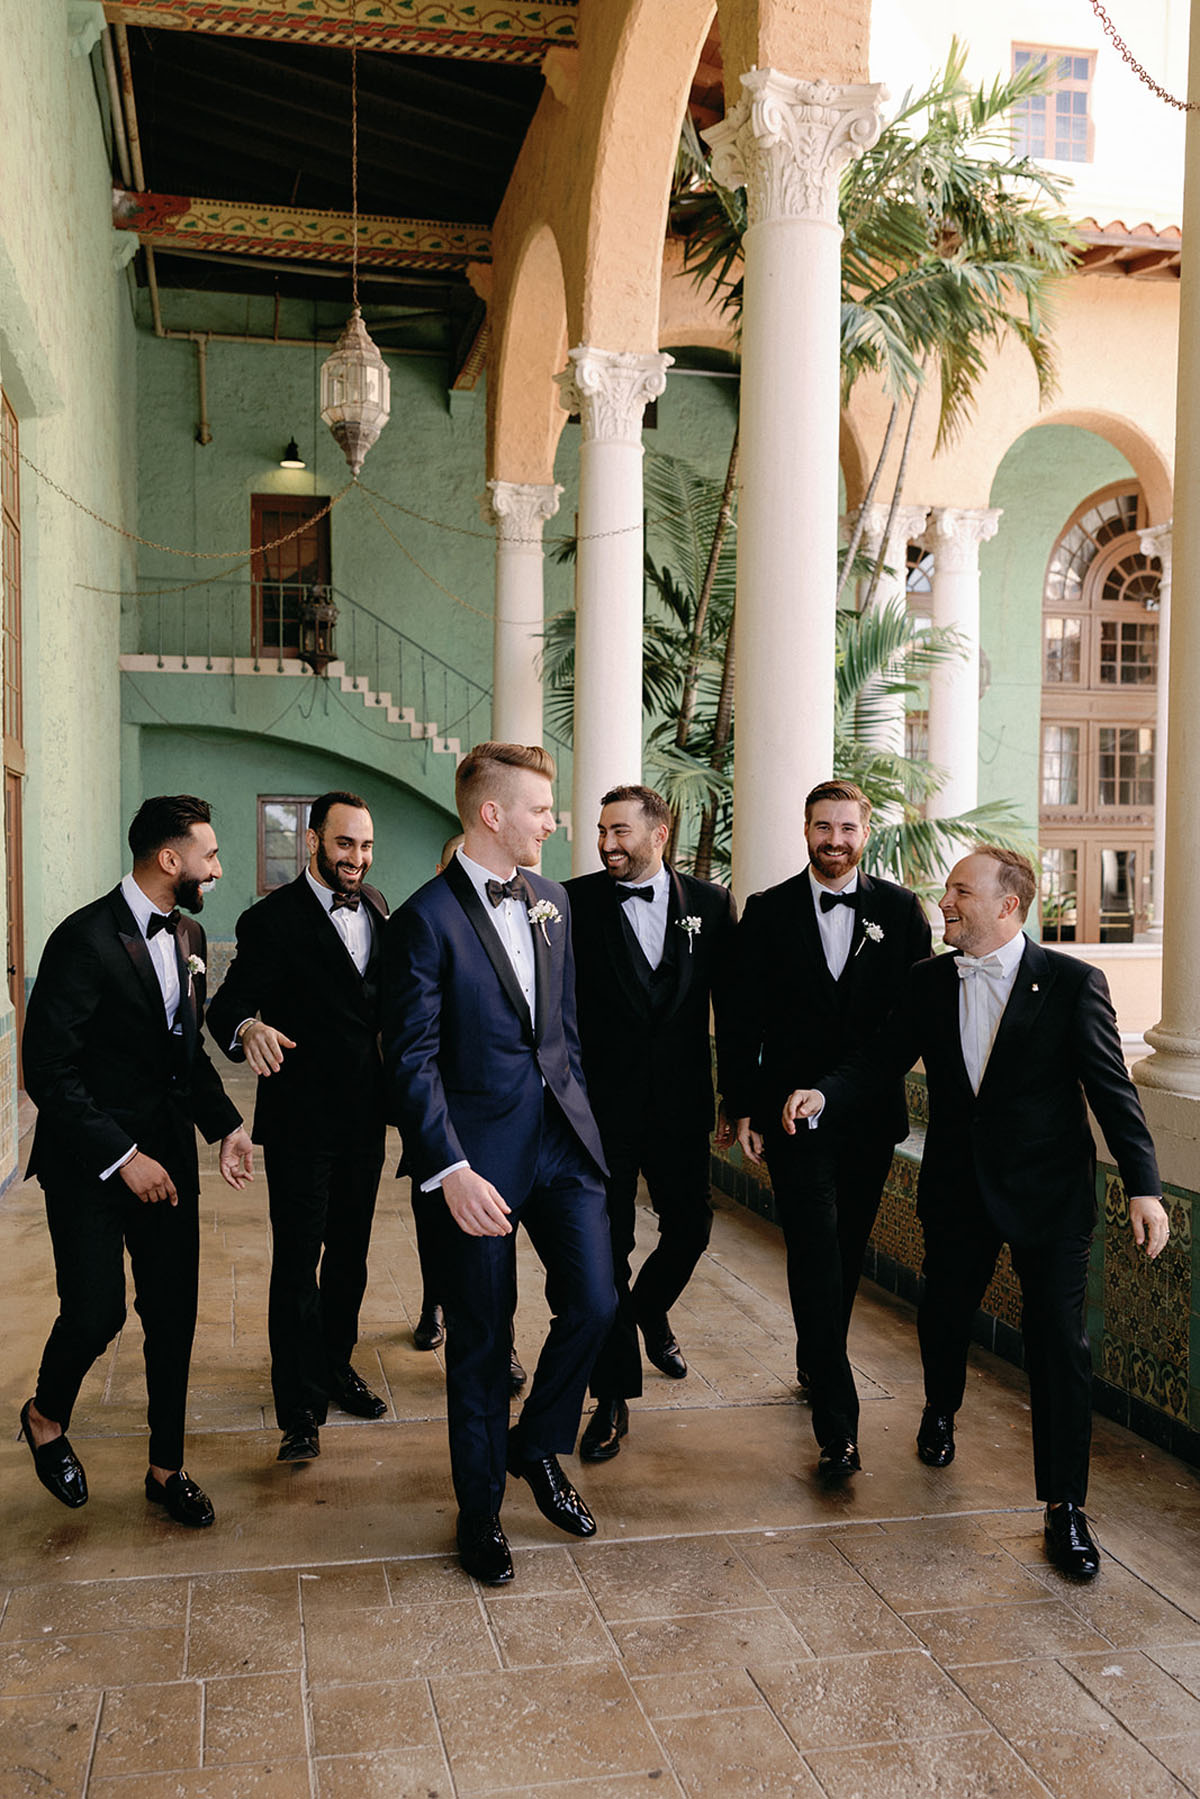 A breathtaking Florida wedding inspired by Italy and the Amalfi Coast